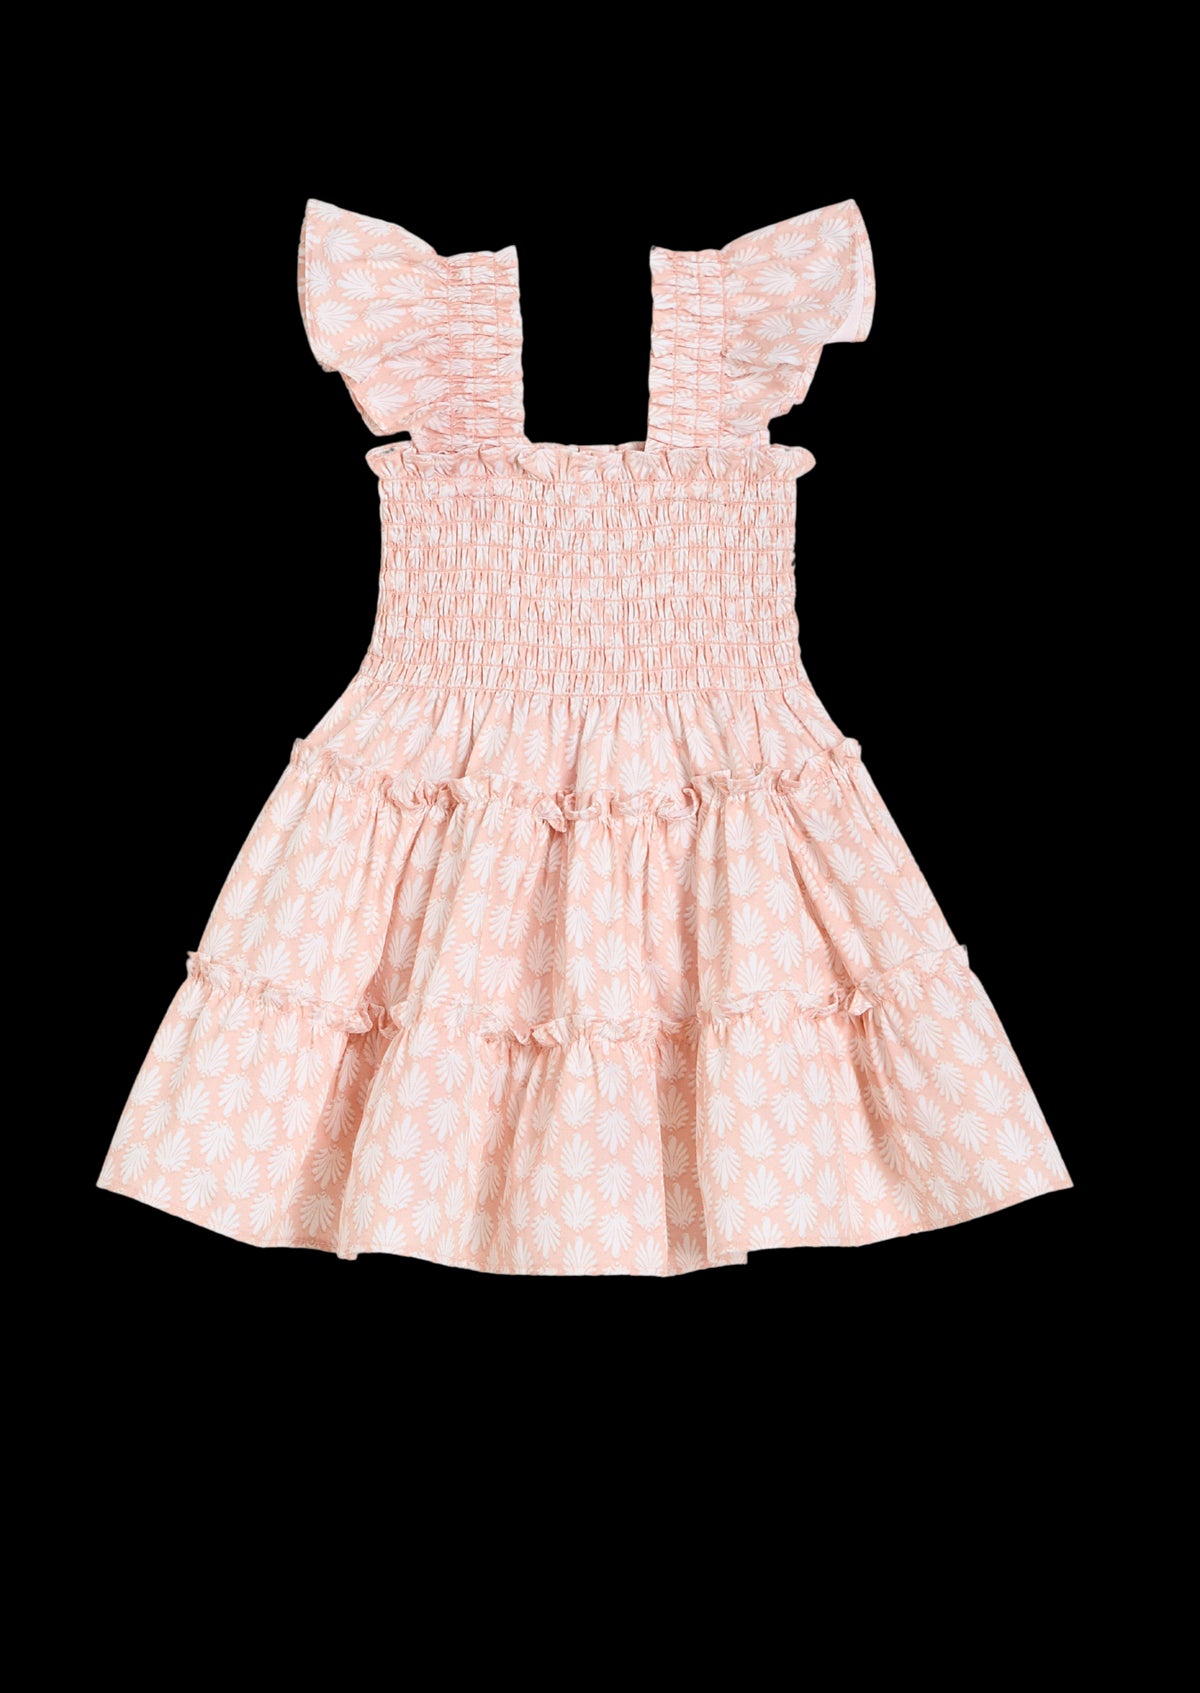 The Baby Ellie Nap Dress in Pale Coral Baroque Shell Cotton Sateen